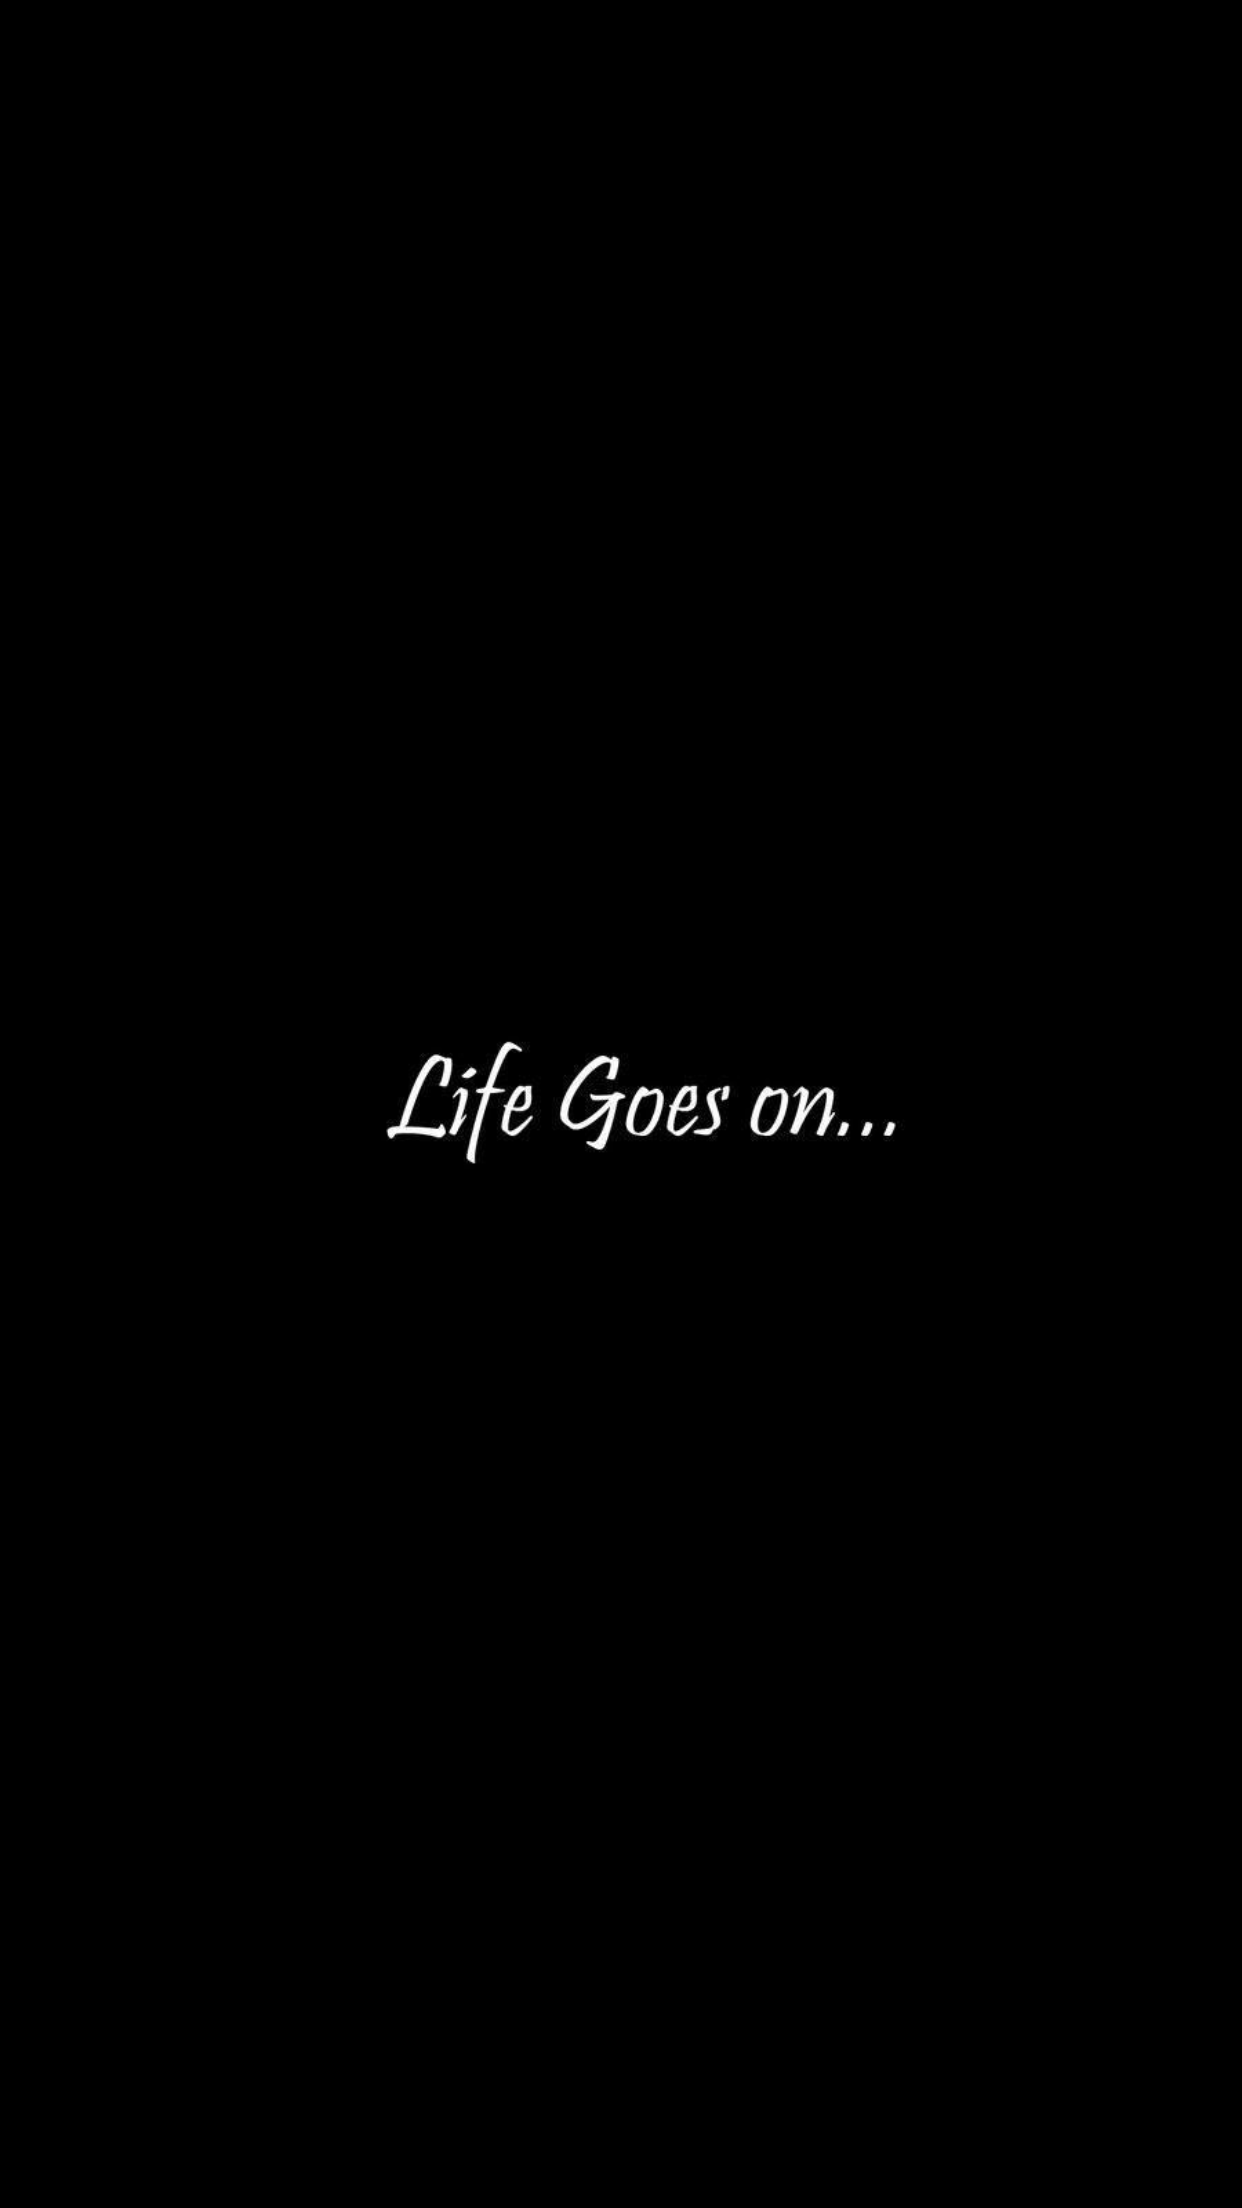 Life goes on bts wallpaper by XAnnx9  Download on ZEDGE  31db